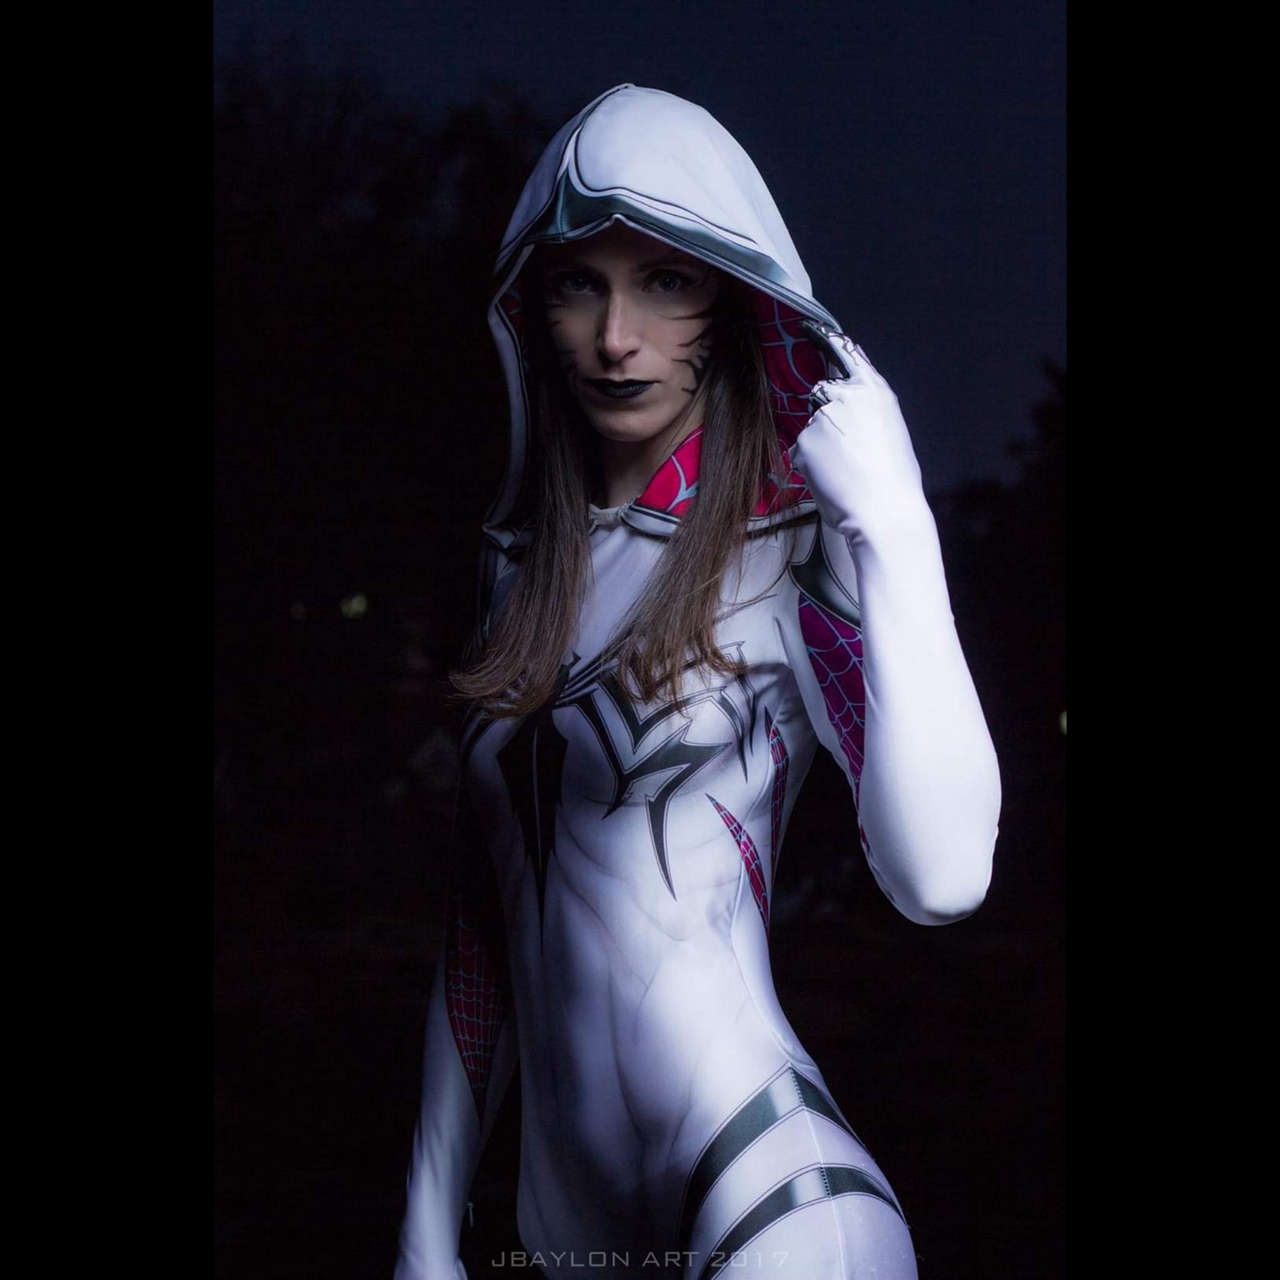 Anti Gwenom By Me Wallescosplay This Was My First Spidey Suit I Got And I Love I